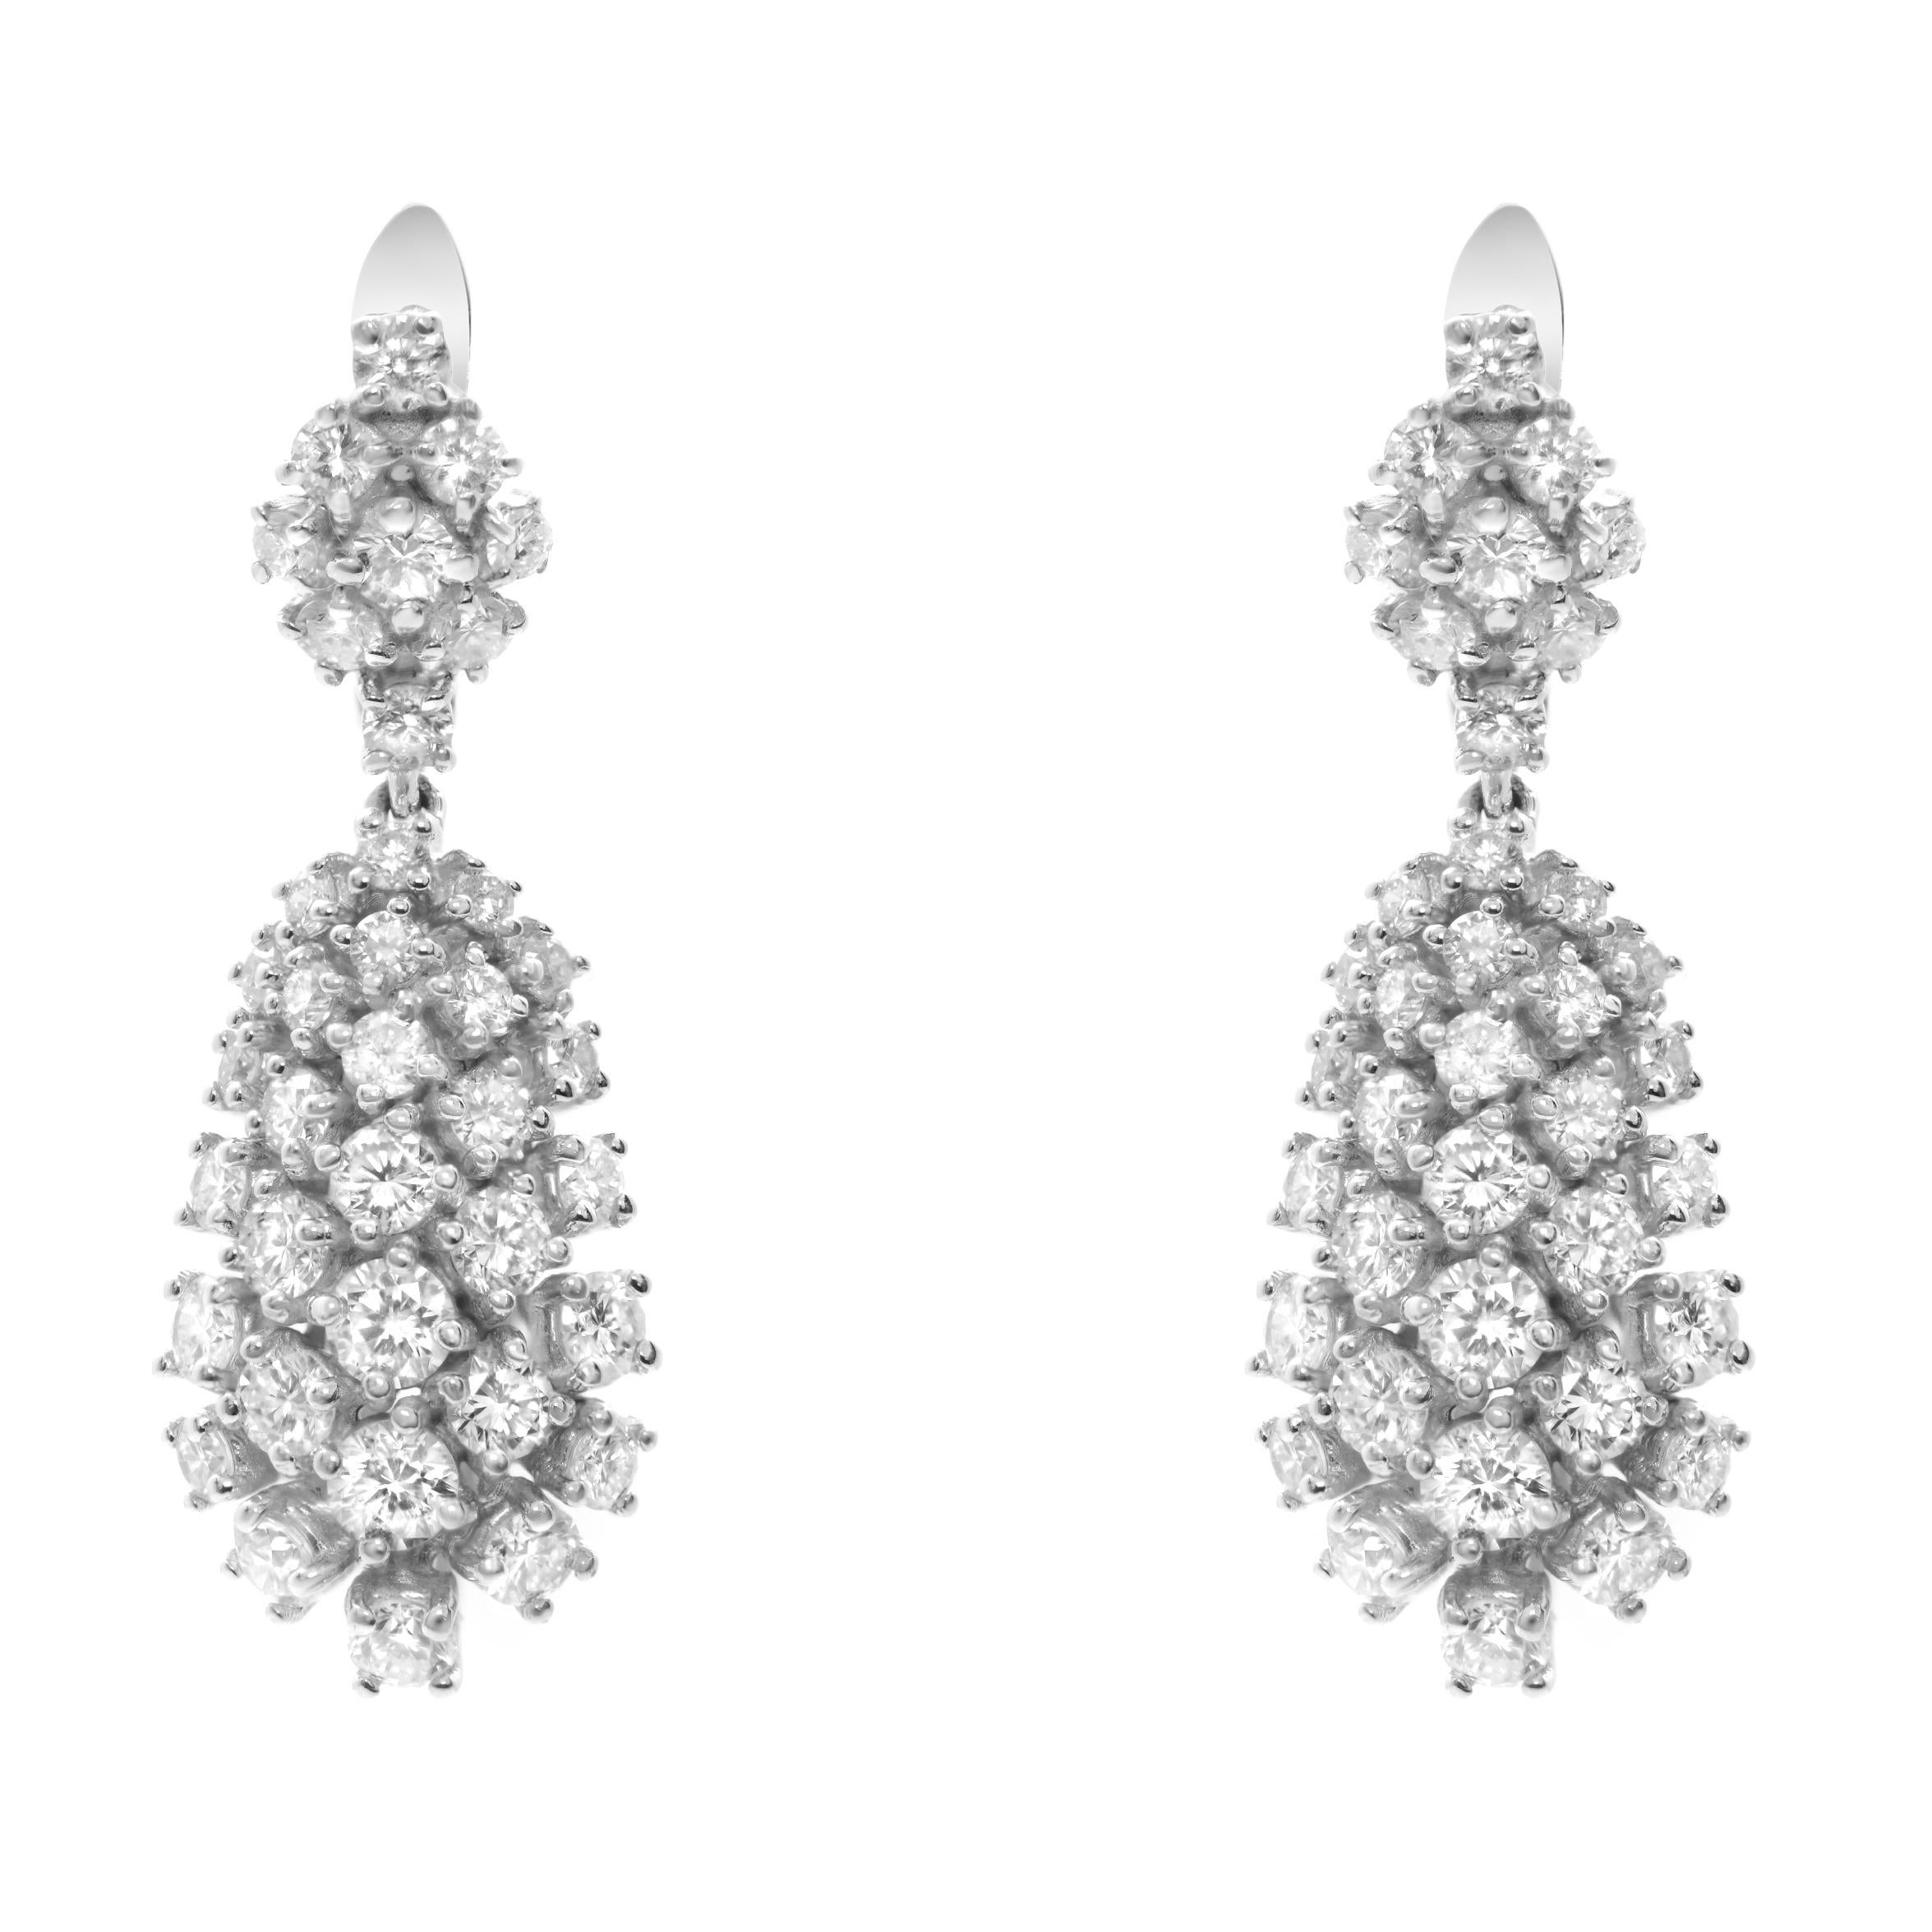 Classic 14k white gold 4.32cttw diamond drop earrings featuring brilliant round diamonds in stunning yet sophisticated 4-prong settings that dangle from an eye-catching diamond lever-back post. Each diamond in this luxurious pair of earrings are